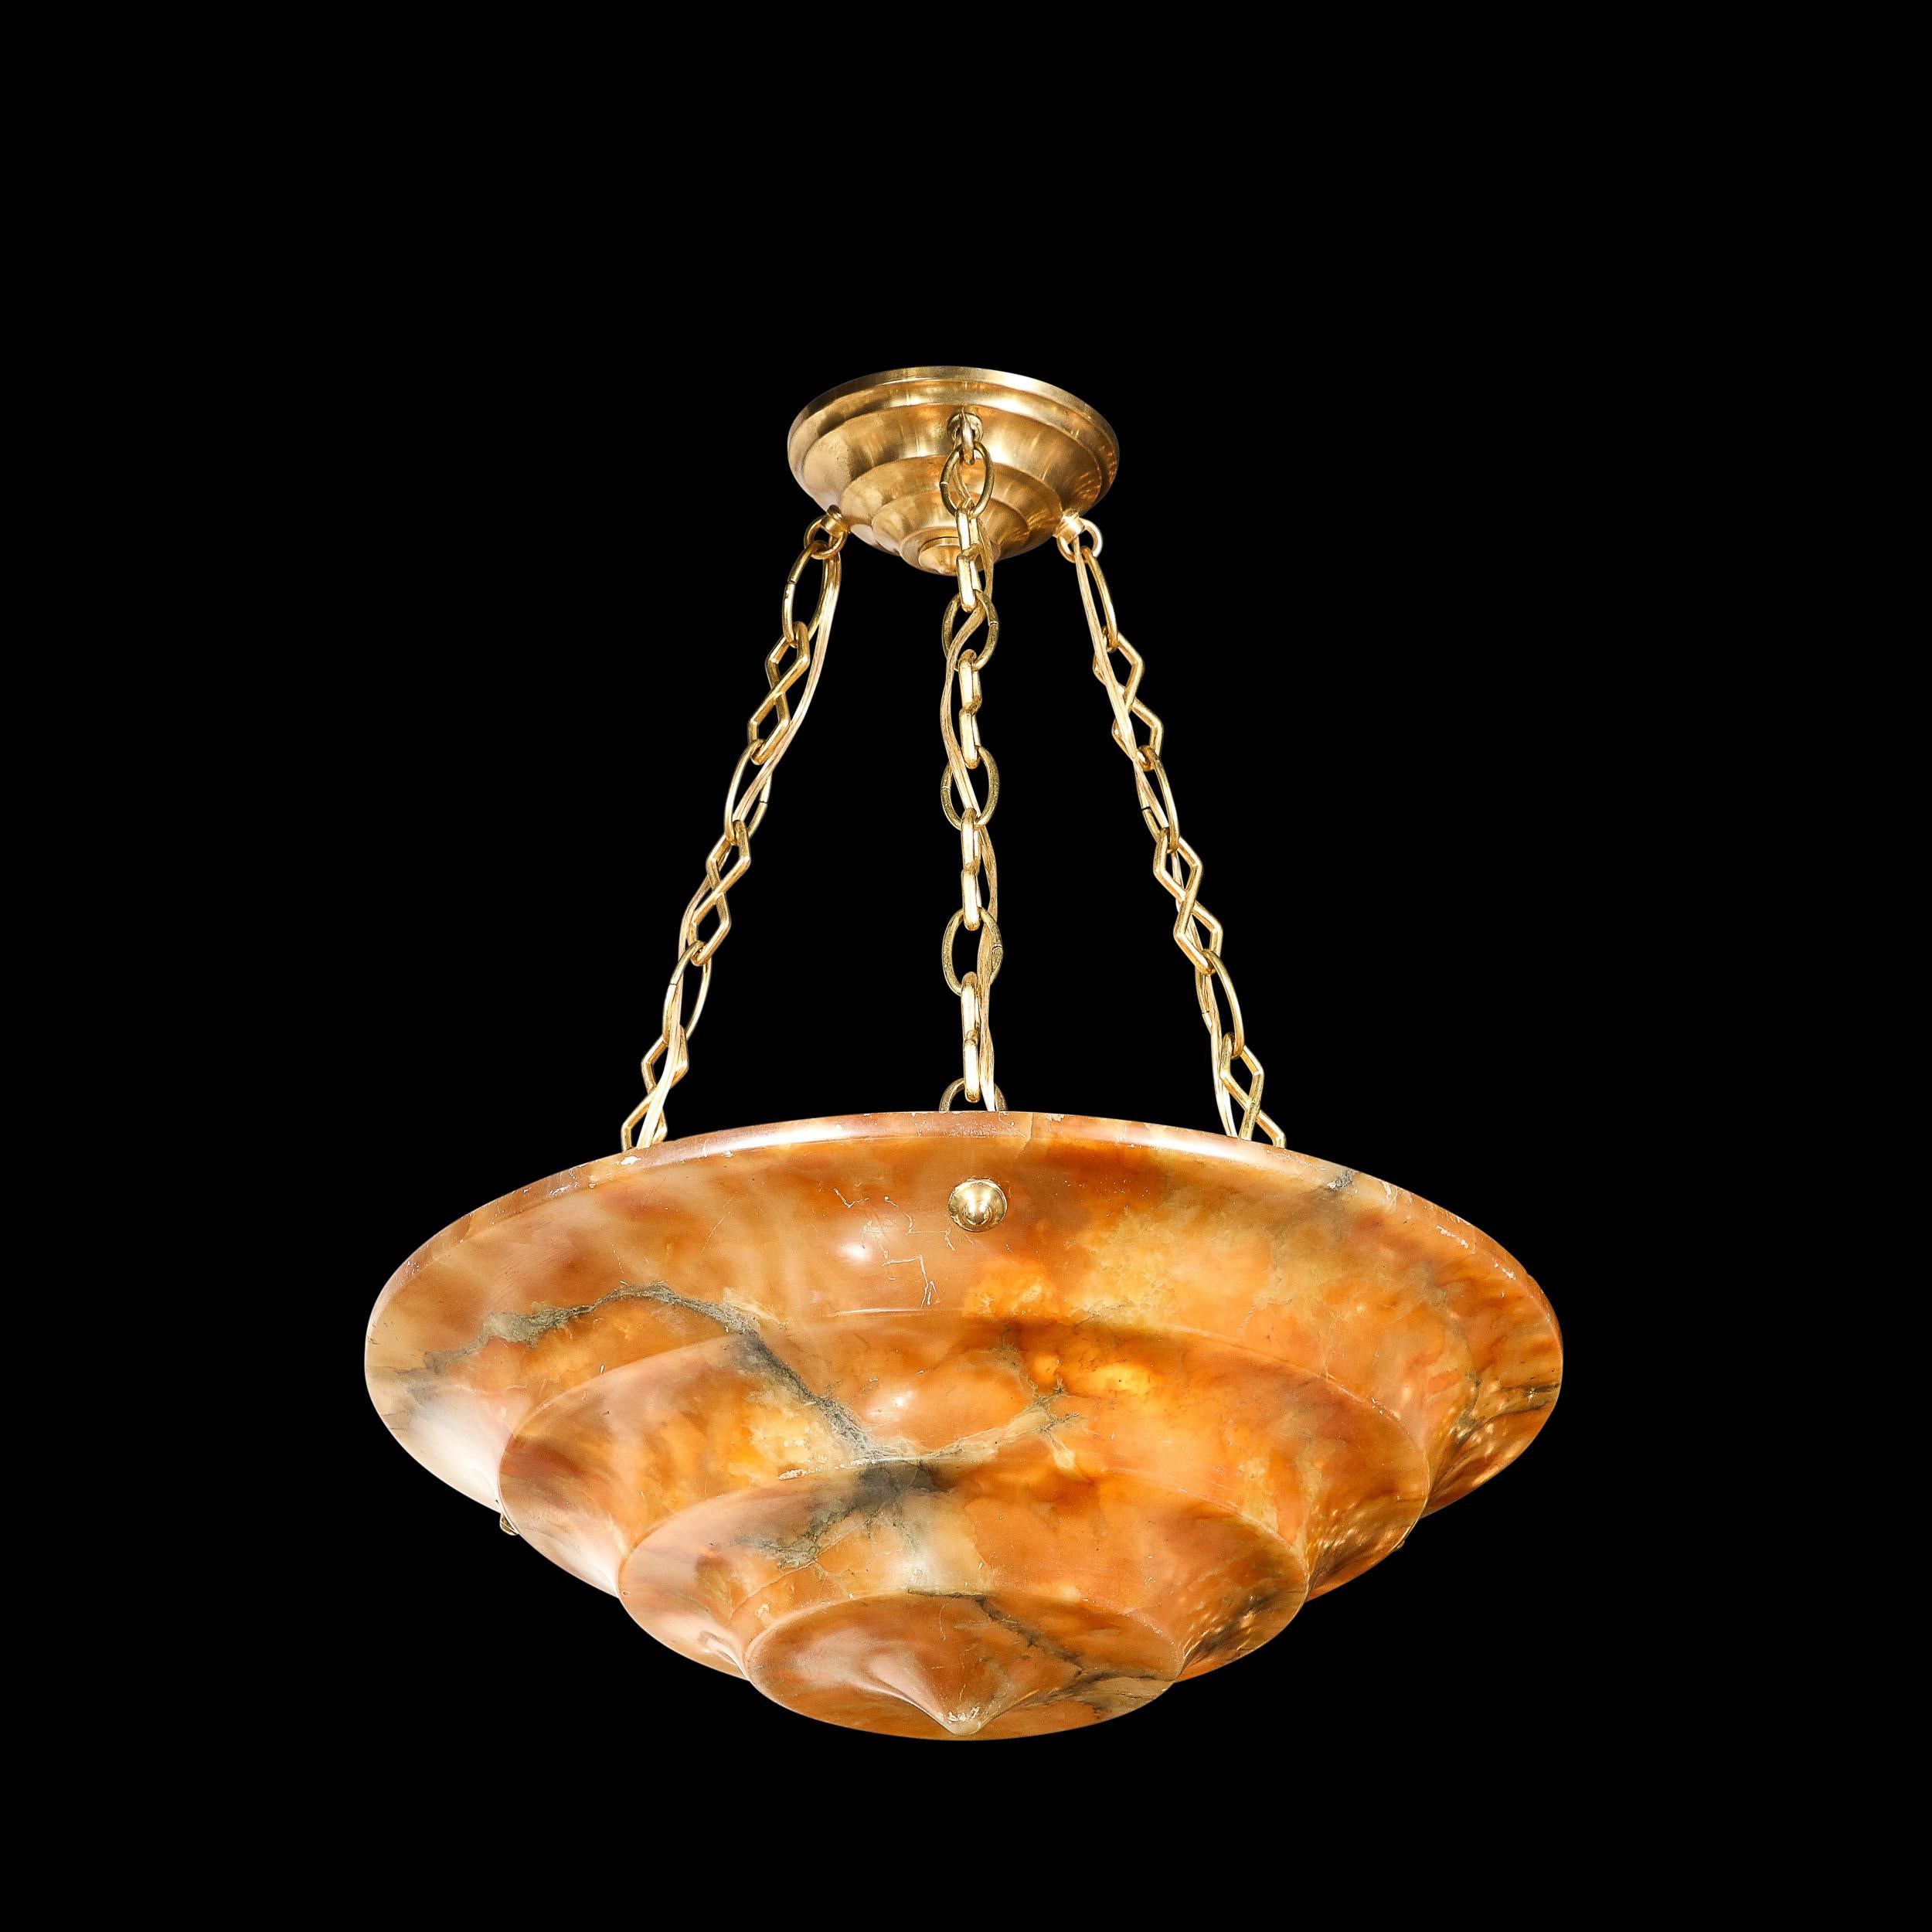 This classic and refined Art Deco Pendant Chandelier is rendered in Tiered Variegated Alabaster with Brass Fittings, originating from Italy, Circa 1930. Featuring stunning hues of warm earth toned oranges and umbers in a truly stunning variegated